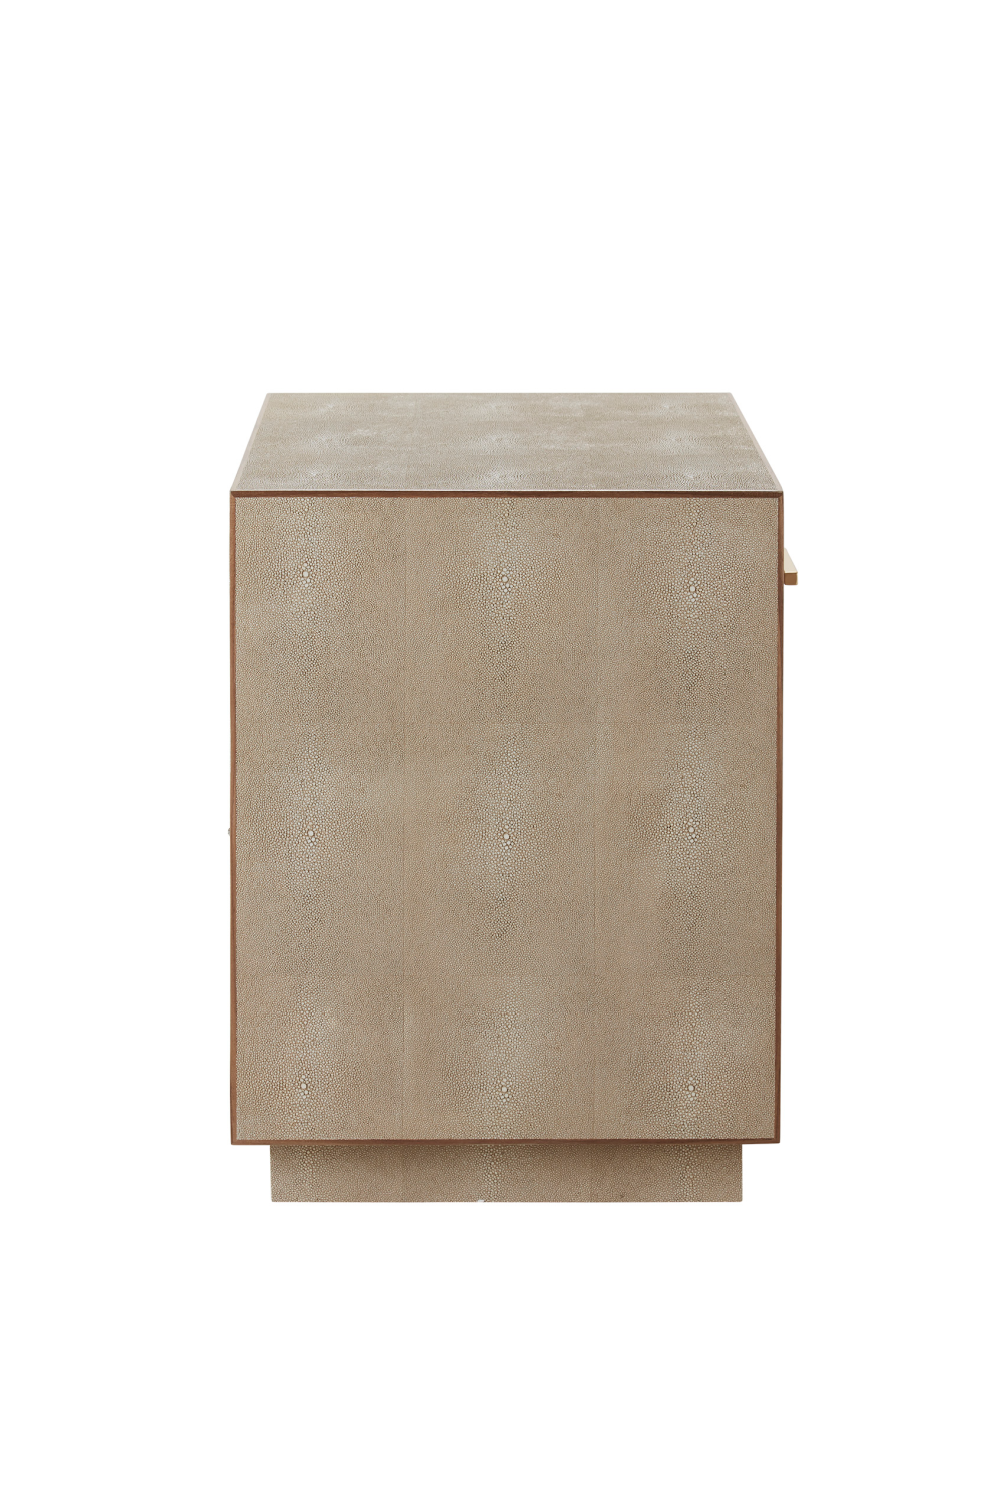 Cream Shagreen with Drawer Bedside Table | Andrew Martin Fitz | OROA